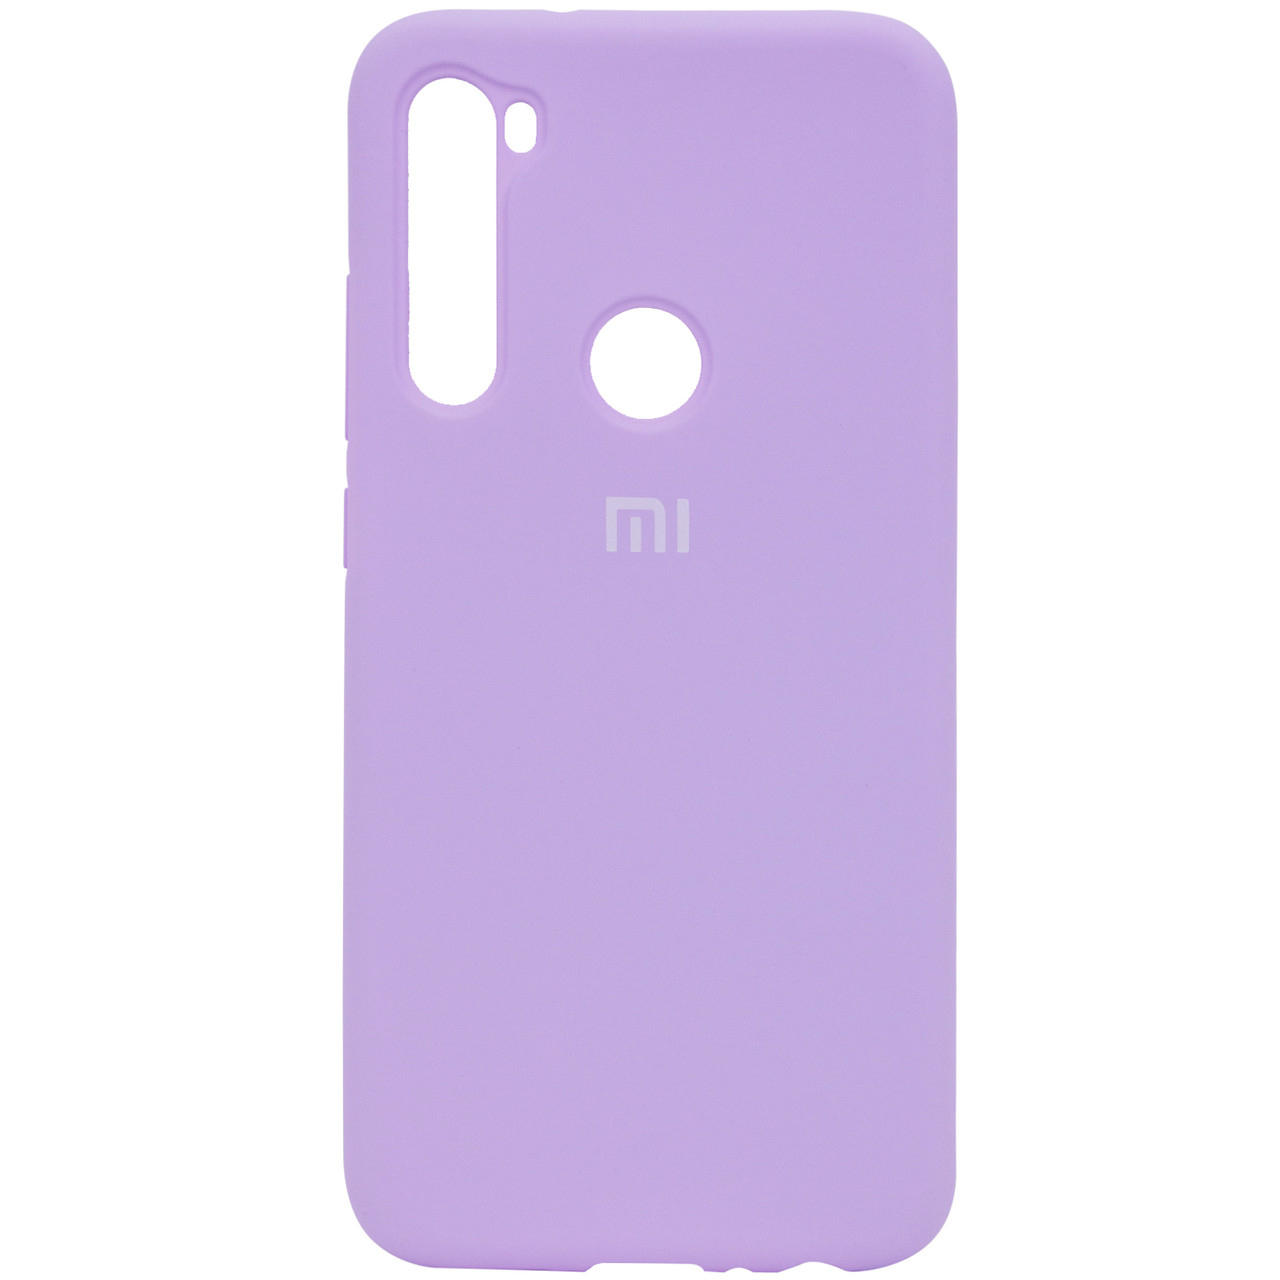 Чехол Silicone Cover Full Protective (AA) для Xiaomi Redmi Note 8T, Сиреневый / dasheen